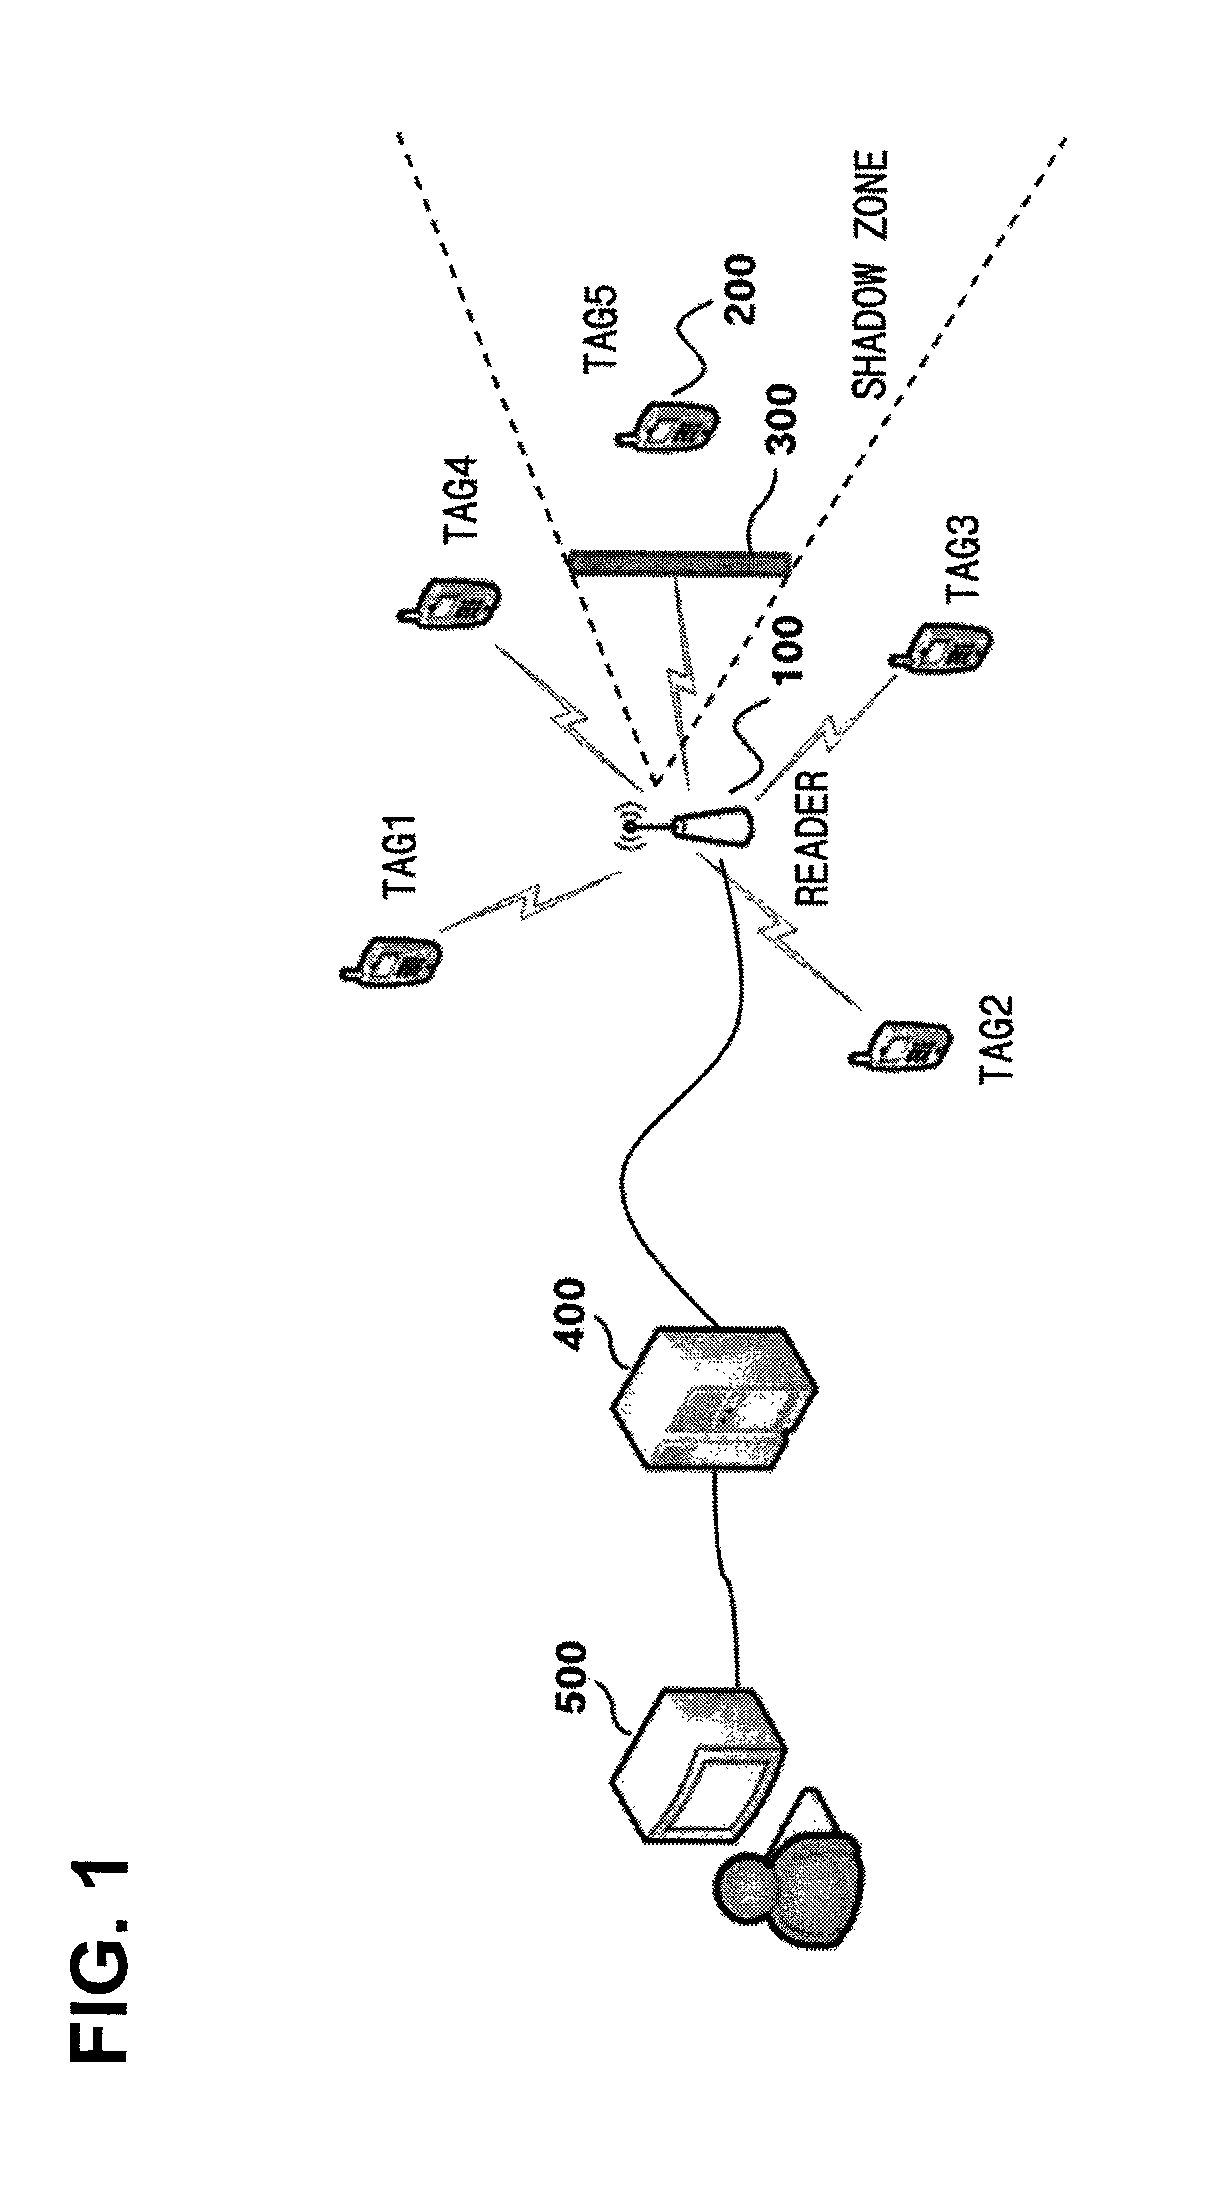 Active RFID system for port logistics using multi-hop communication and communication method in the system